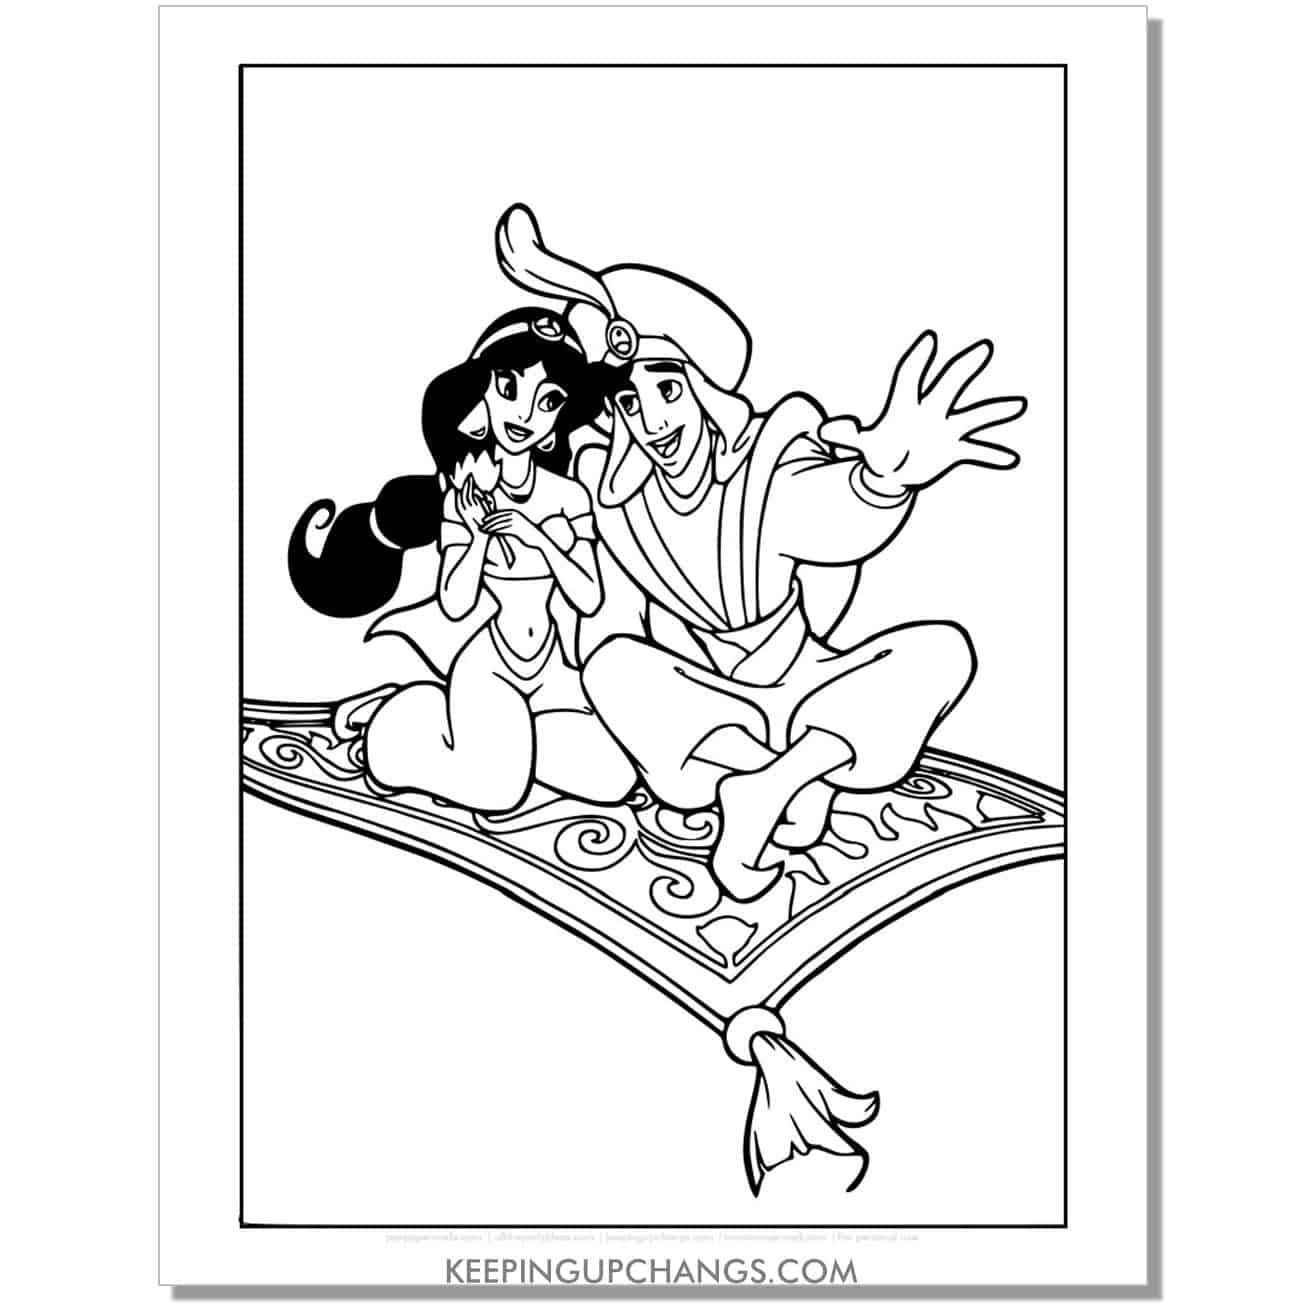 jasmine, aladdin looking at a whole new world coloring page, sheet.